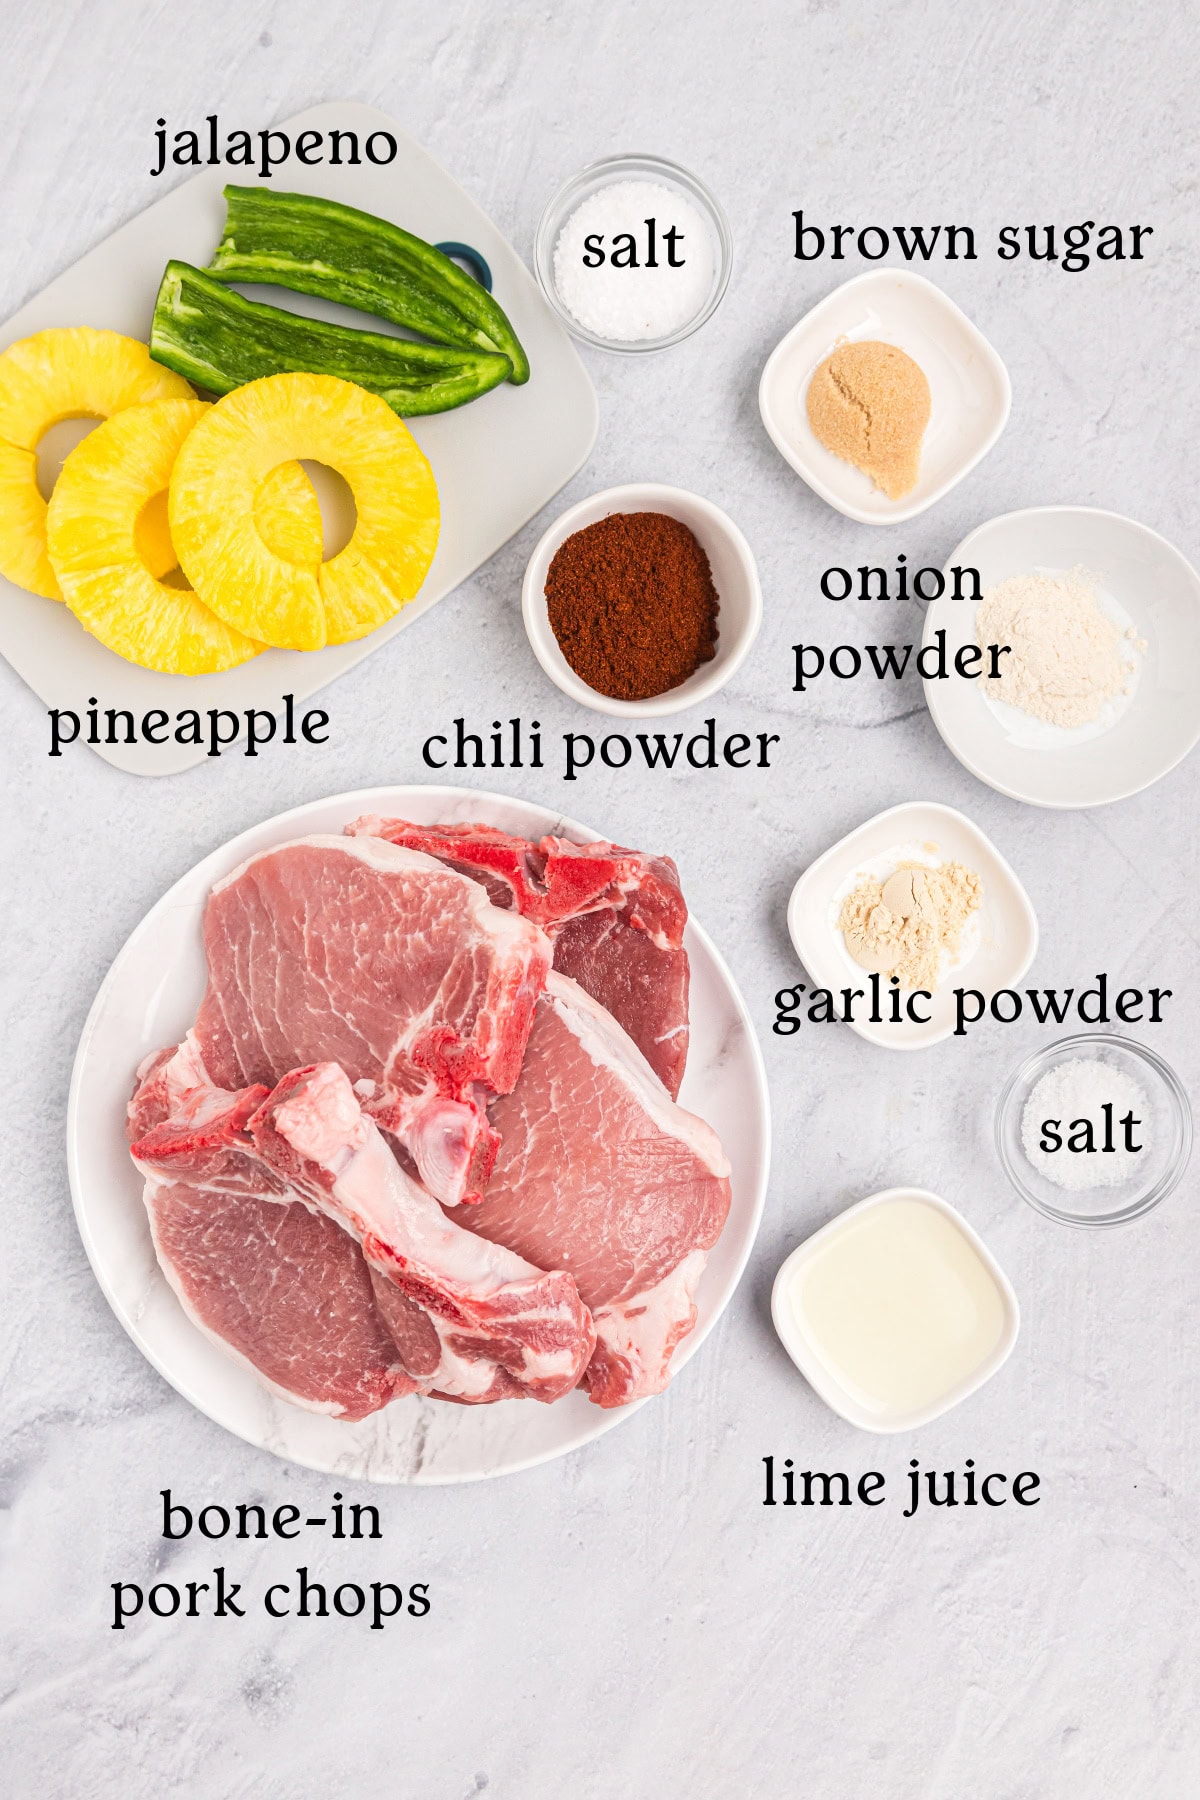 ingredients displayed for making chili rubbed pork chops